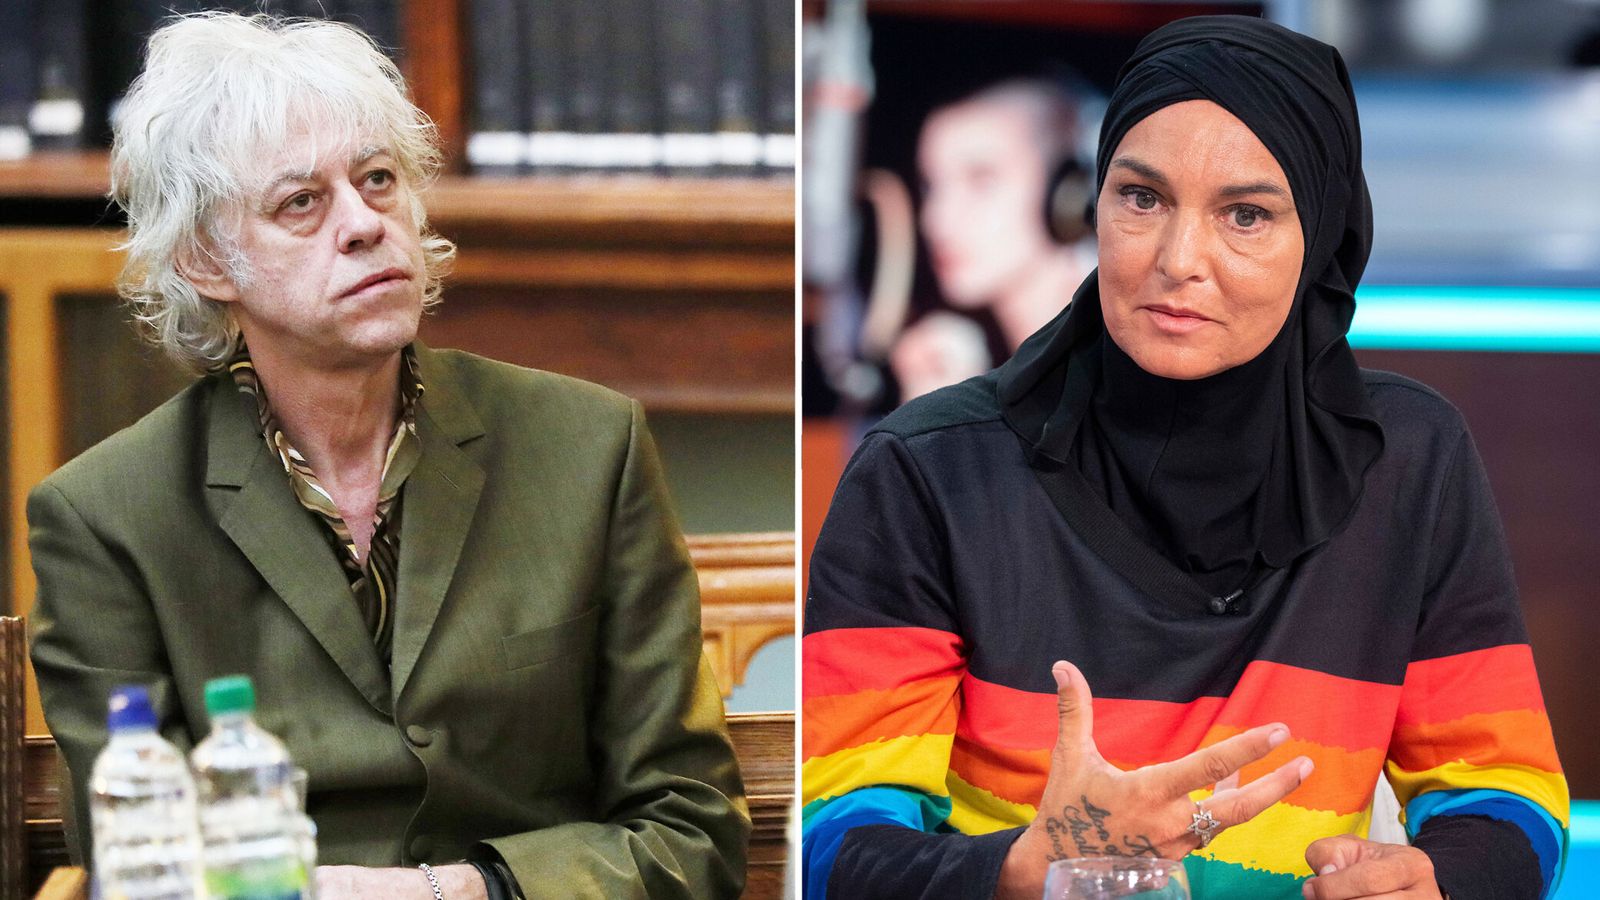 Sinead O'Connor sent texts 'laden with despair' to Bob Geldof in weeks before her death